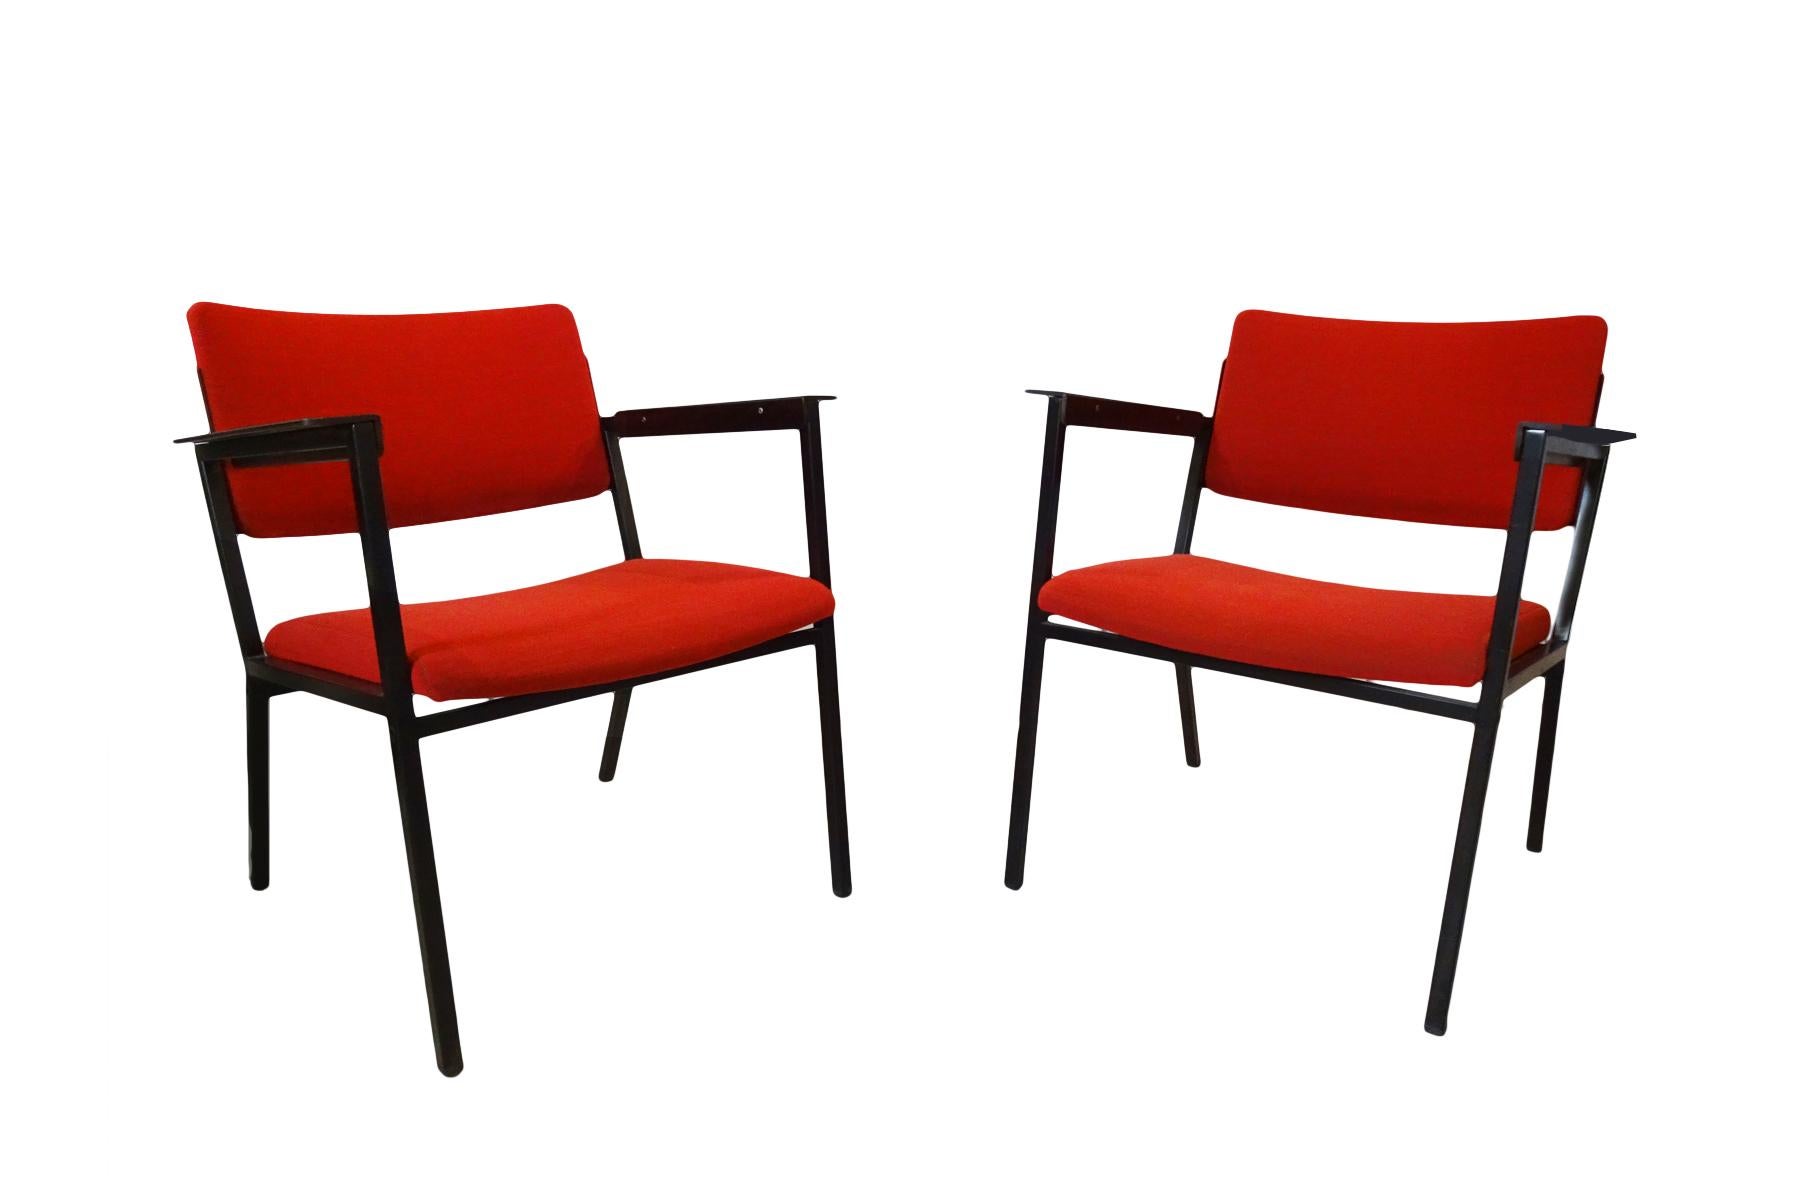 Vintage midcentury steel and red fabric armchairs in the style of Gijs van der Sluis

A pair of stylish vintage, midcentury steel and red fabric armchairs in the style of Gijs van der Sluis.
Unfortunately there are no markings on these chairs